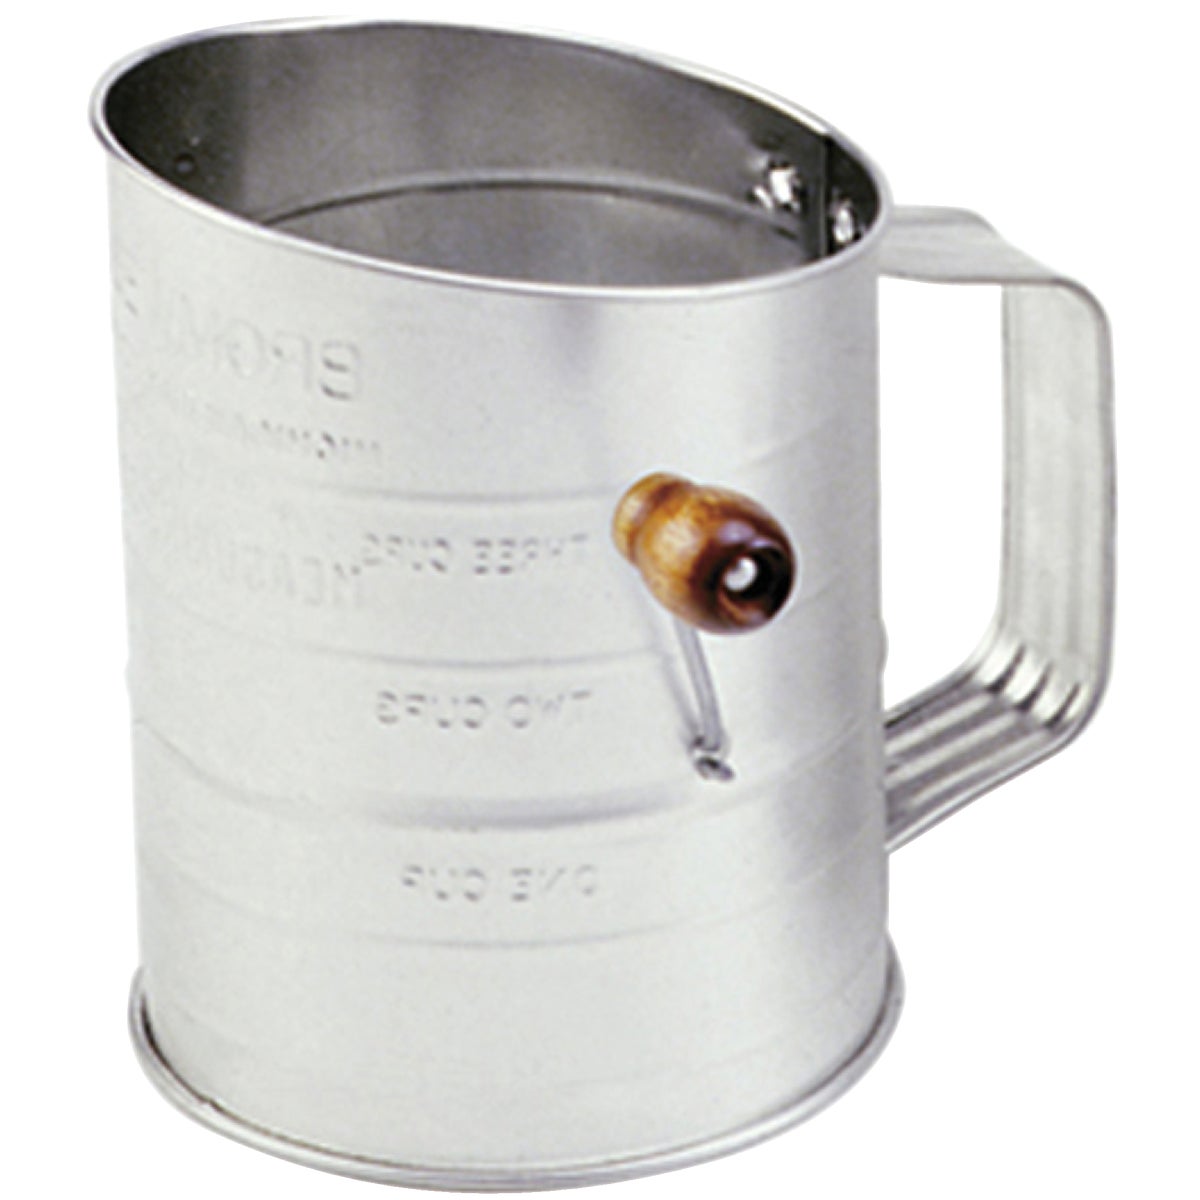 Item 604108, Norpros Flour Sifter consists of stainless steel material making it very 